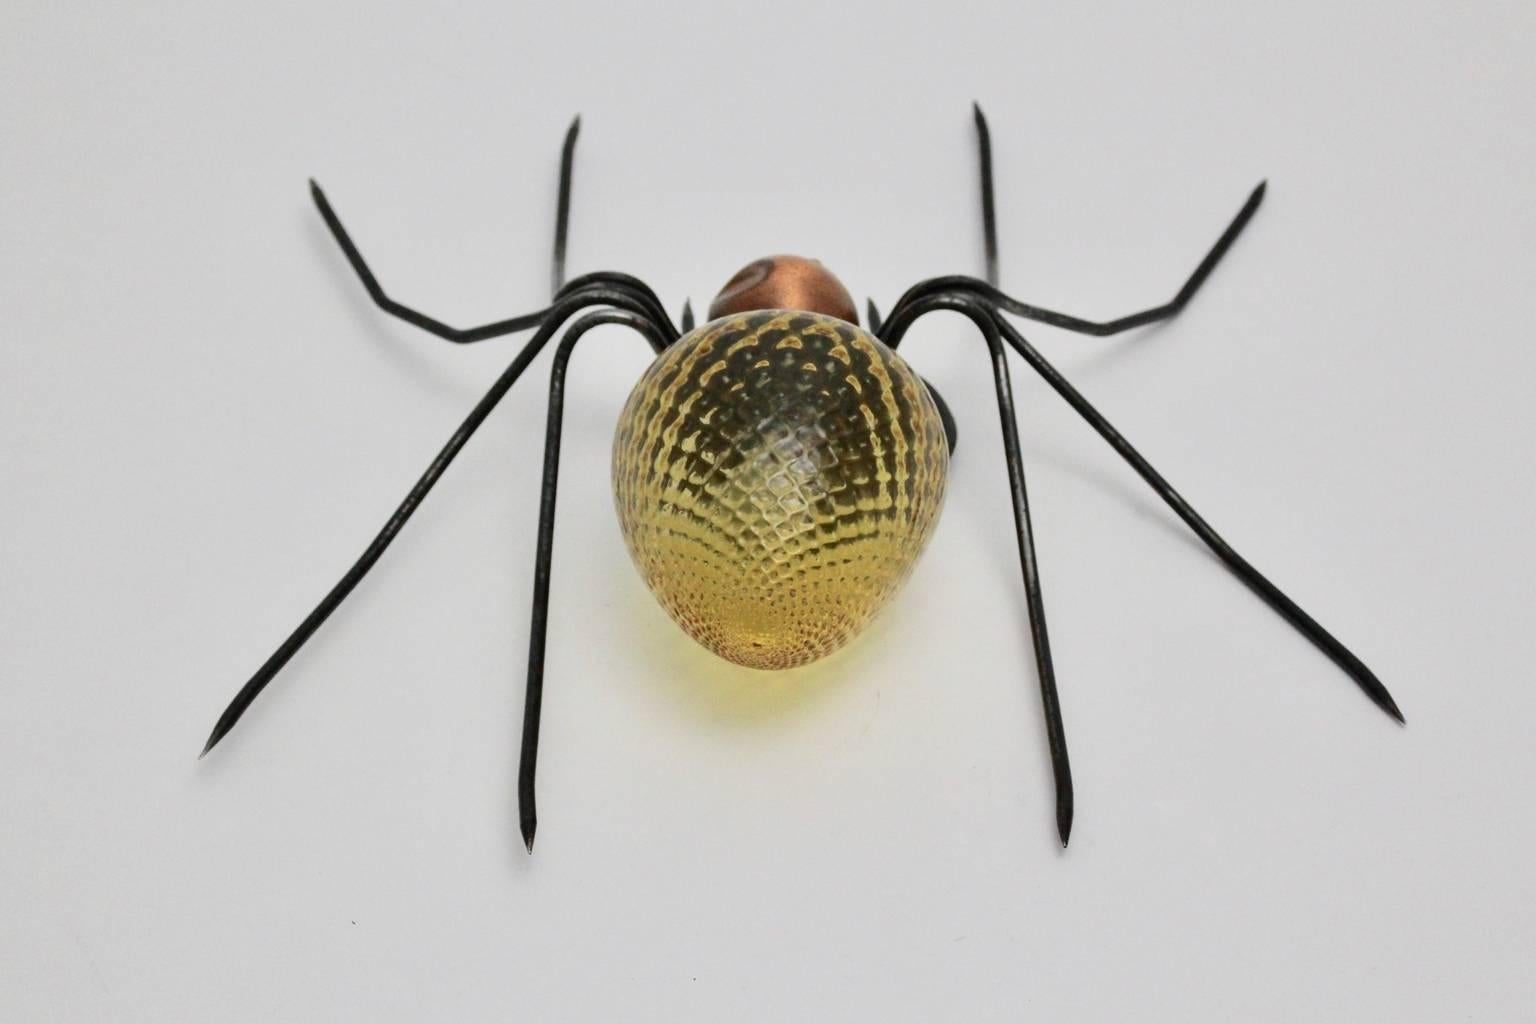 The extraordinary wall lamp is shaped like a spider. The legs were made of metal wire, while the body was made of yellow grooved glass and copper.
Inside the glass body is a E 14 socket.
This lighting works perfect as well as table lamp or